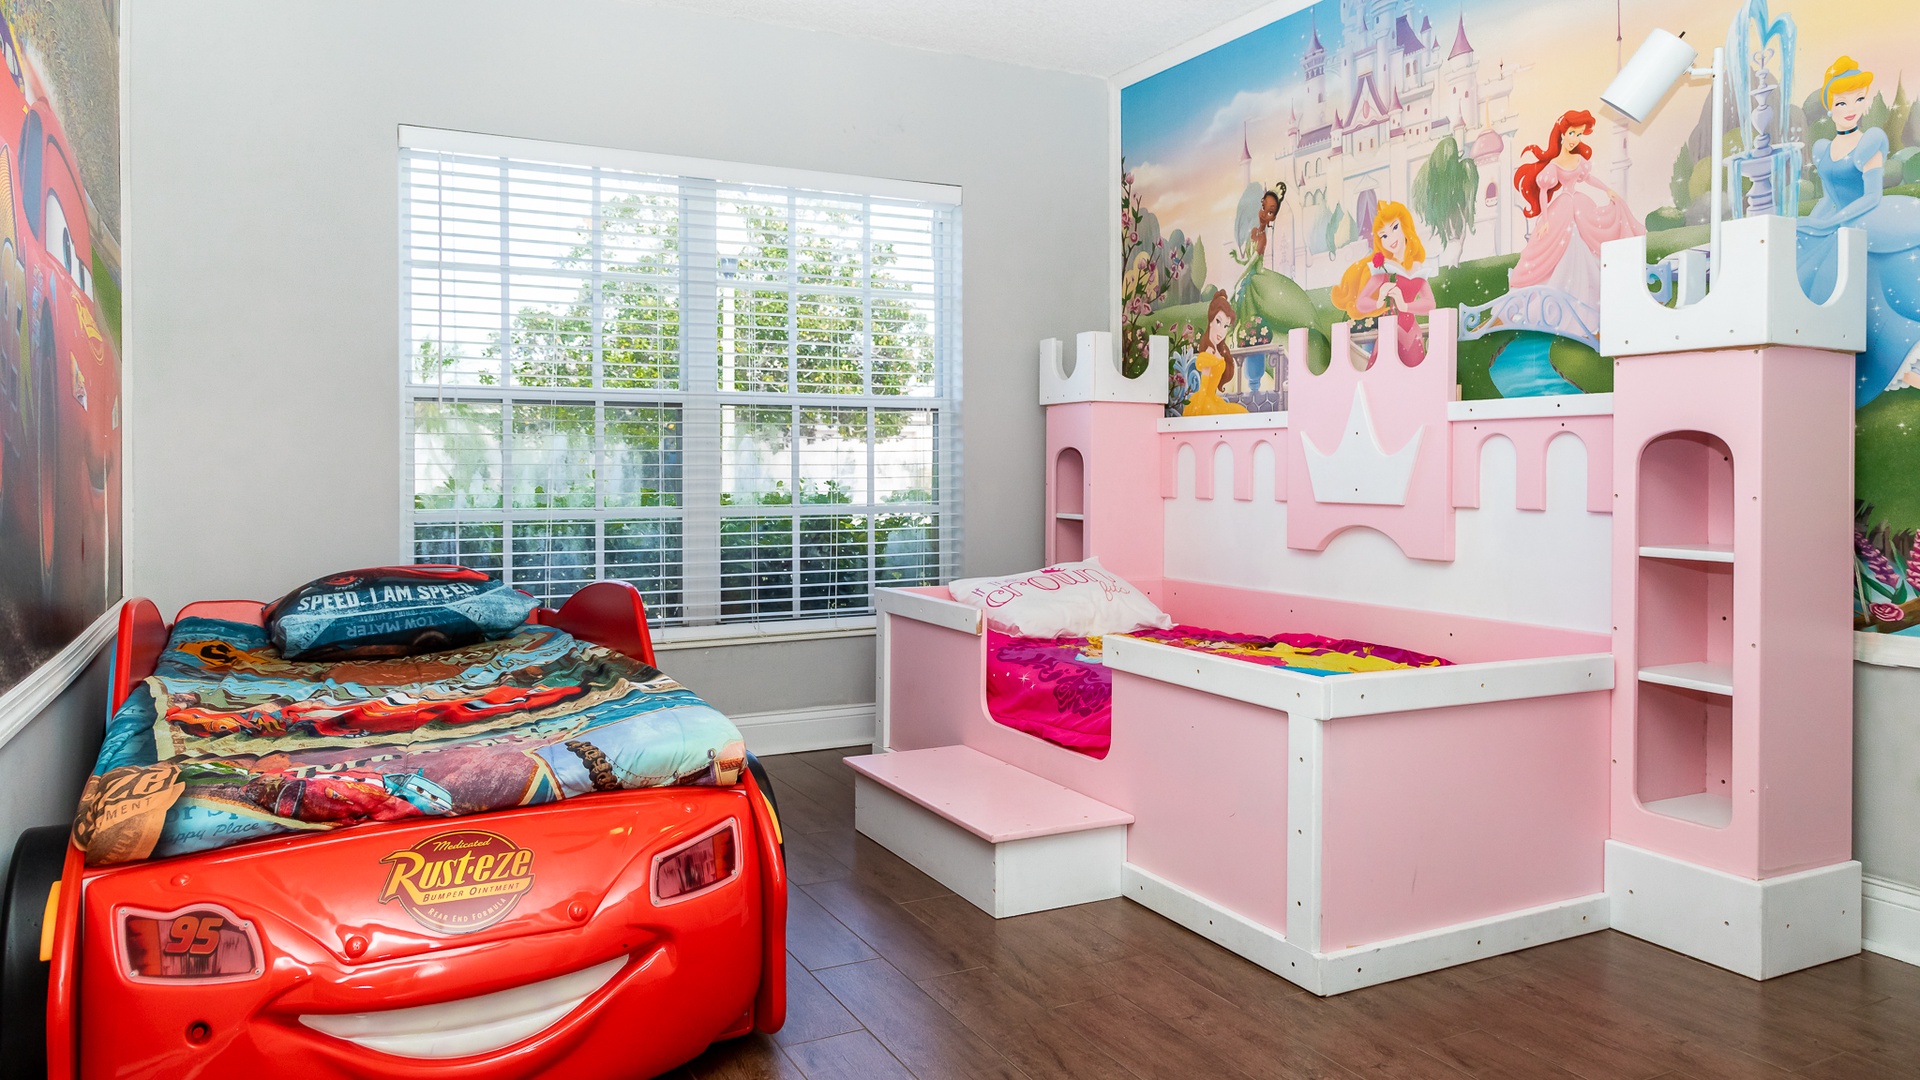 Bedroom #3 - 2 Twin tumbler beds with Princess & Cars themed beds